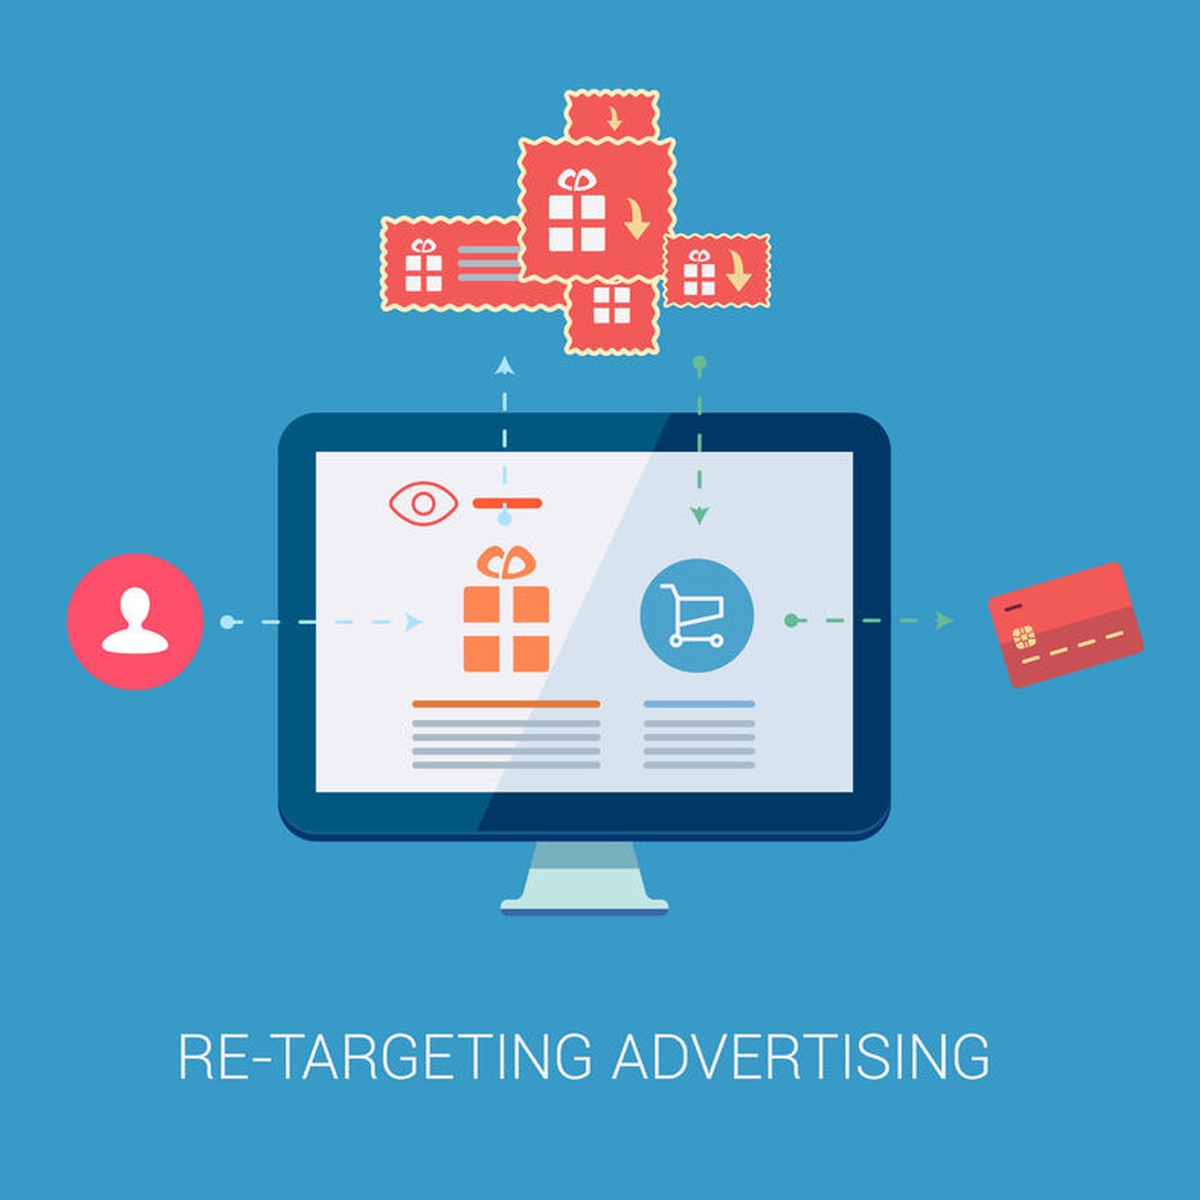 Virtual Vision recently launched Adroll Retargeting for GBagz Gear